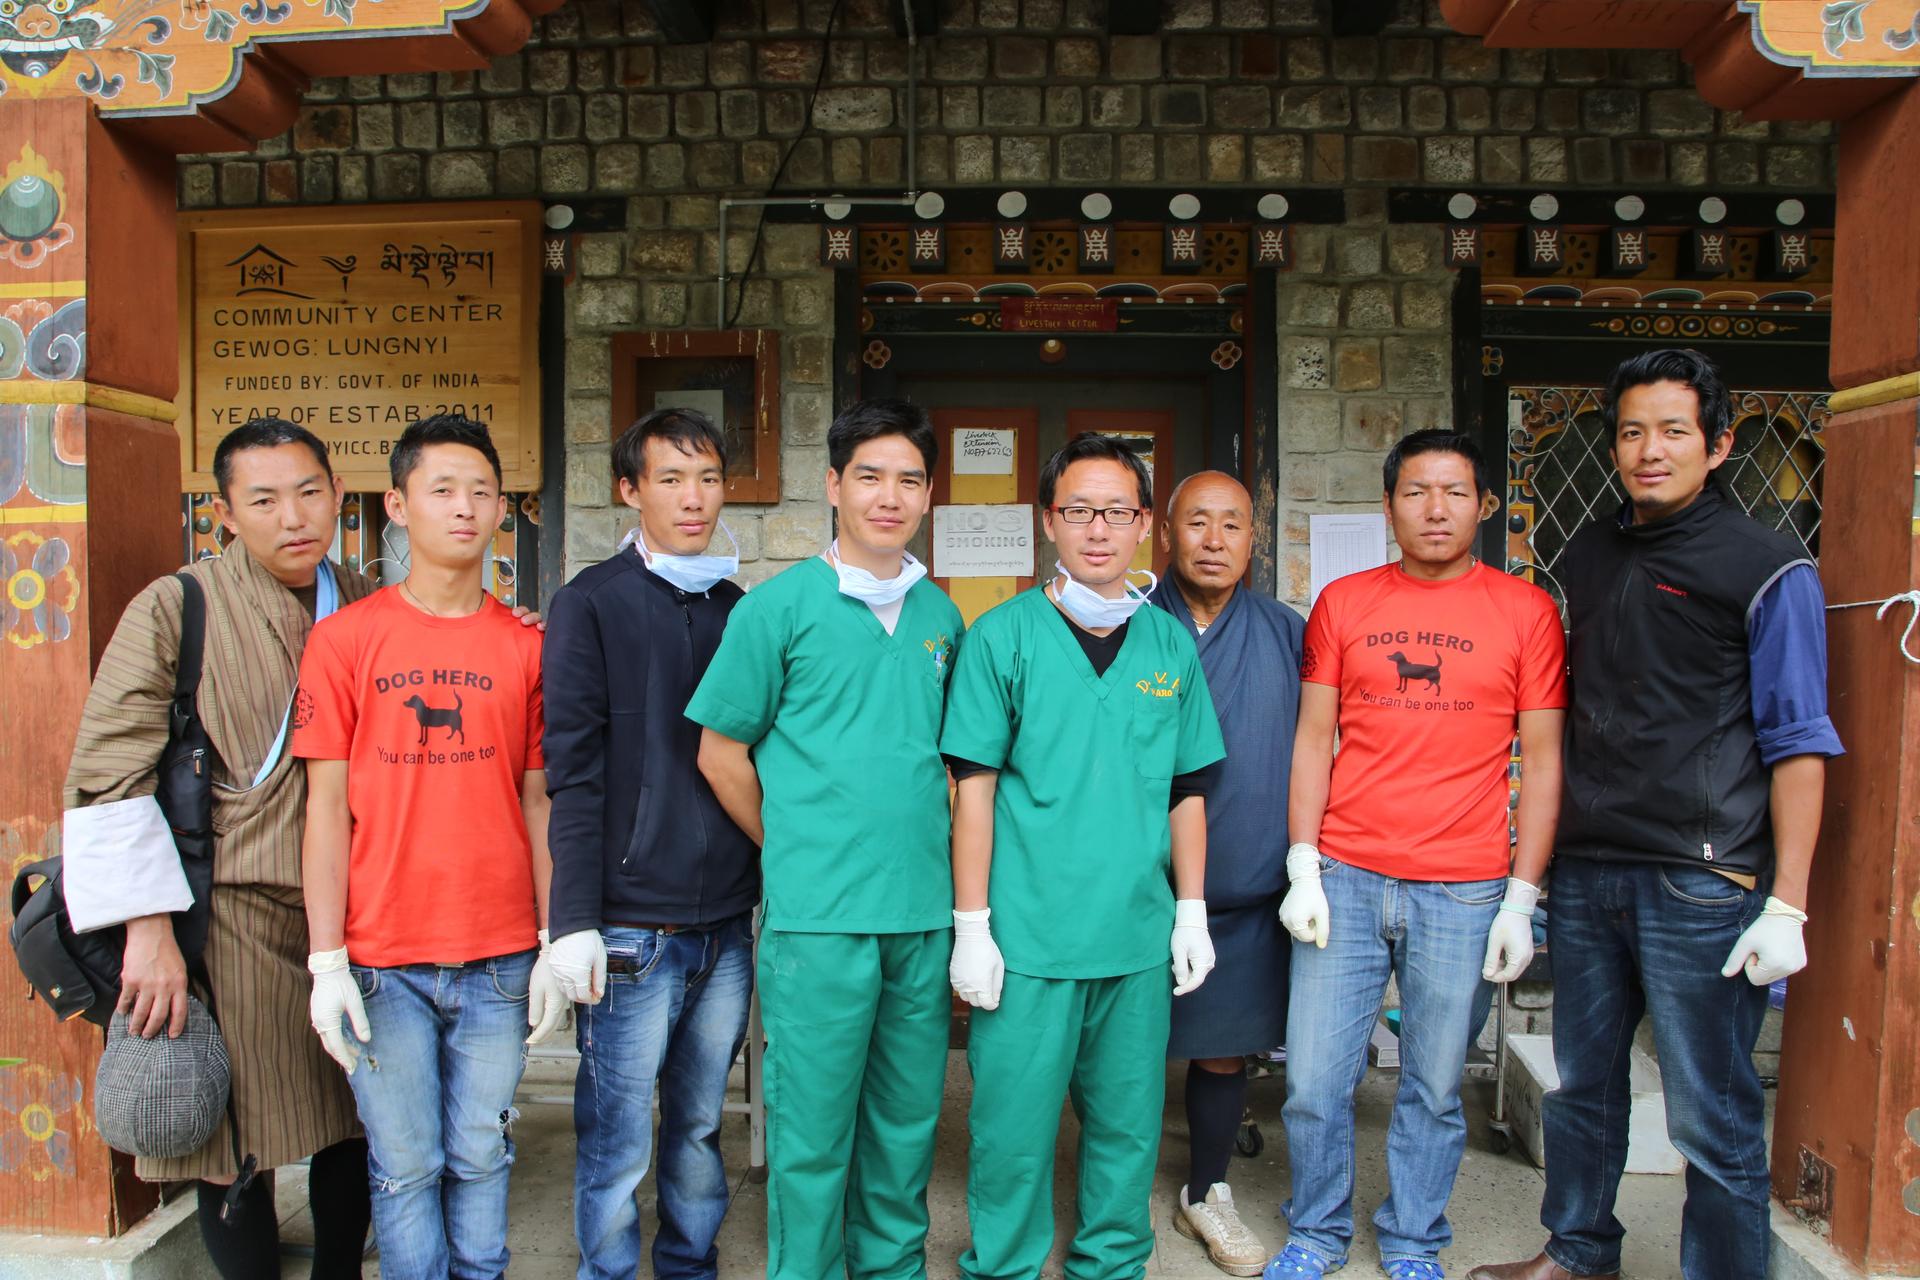 The dog population management team in Paro includes two vets (in green scrubs in front), vet techs, and dog catchers. At this point, most vets have personally done thousands of spay/neuter procedures.